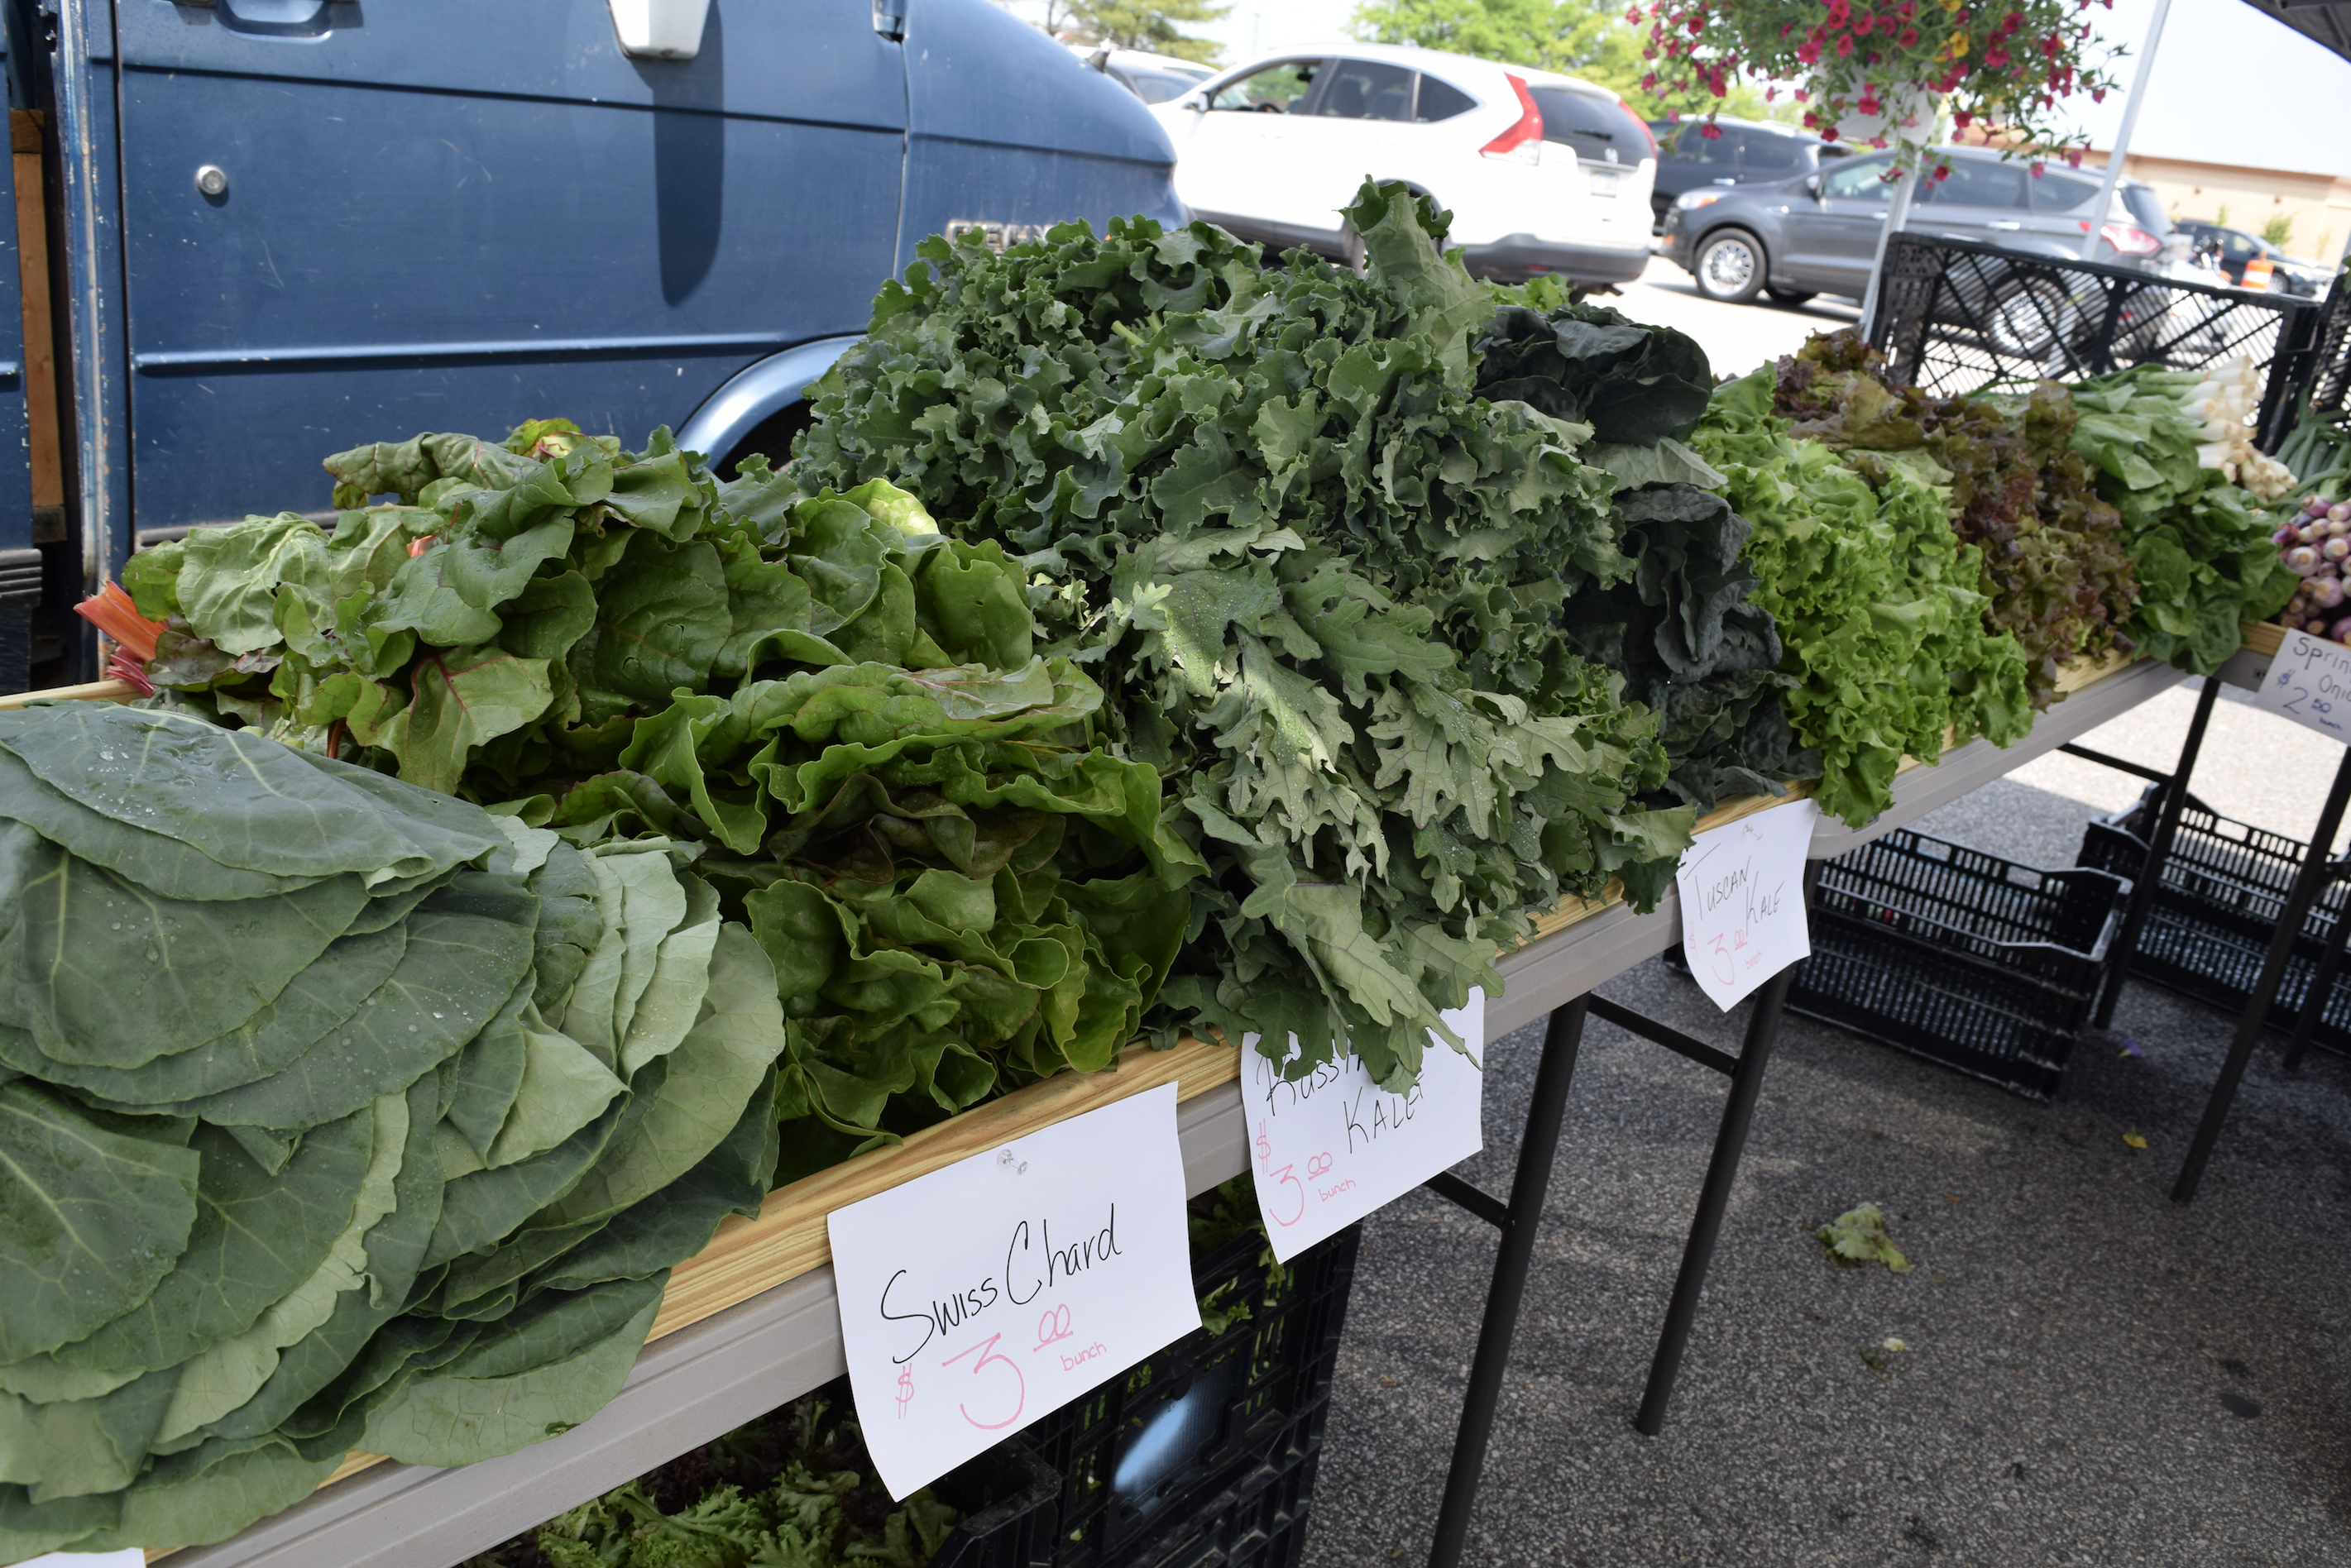 Fresh produce found at the farmers market in Woodbridge, Virginia (The Market at Potomac Mills)